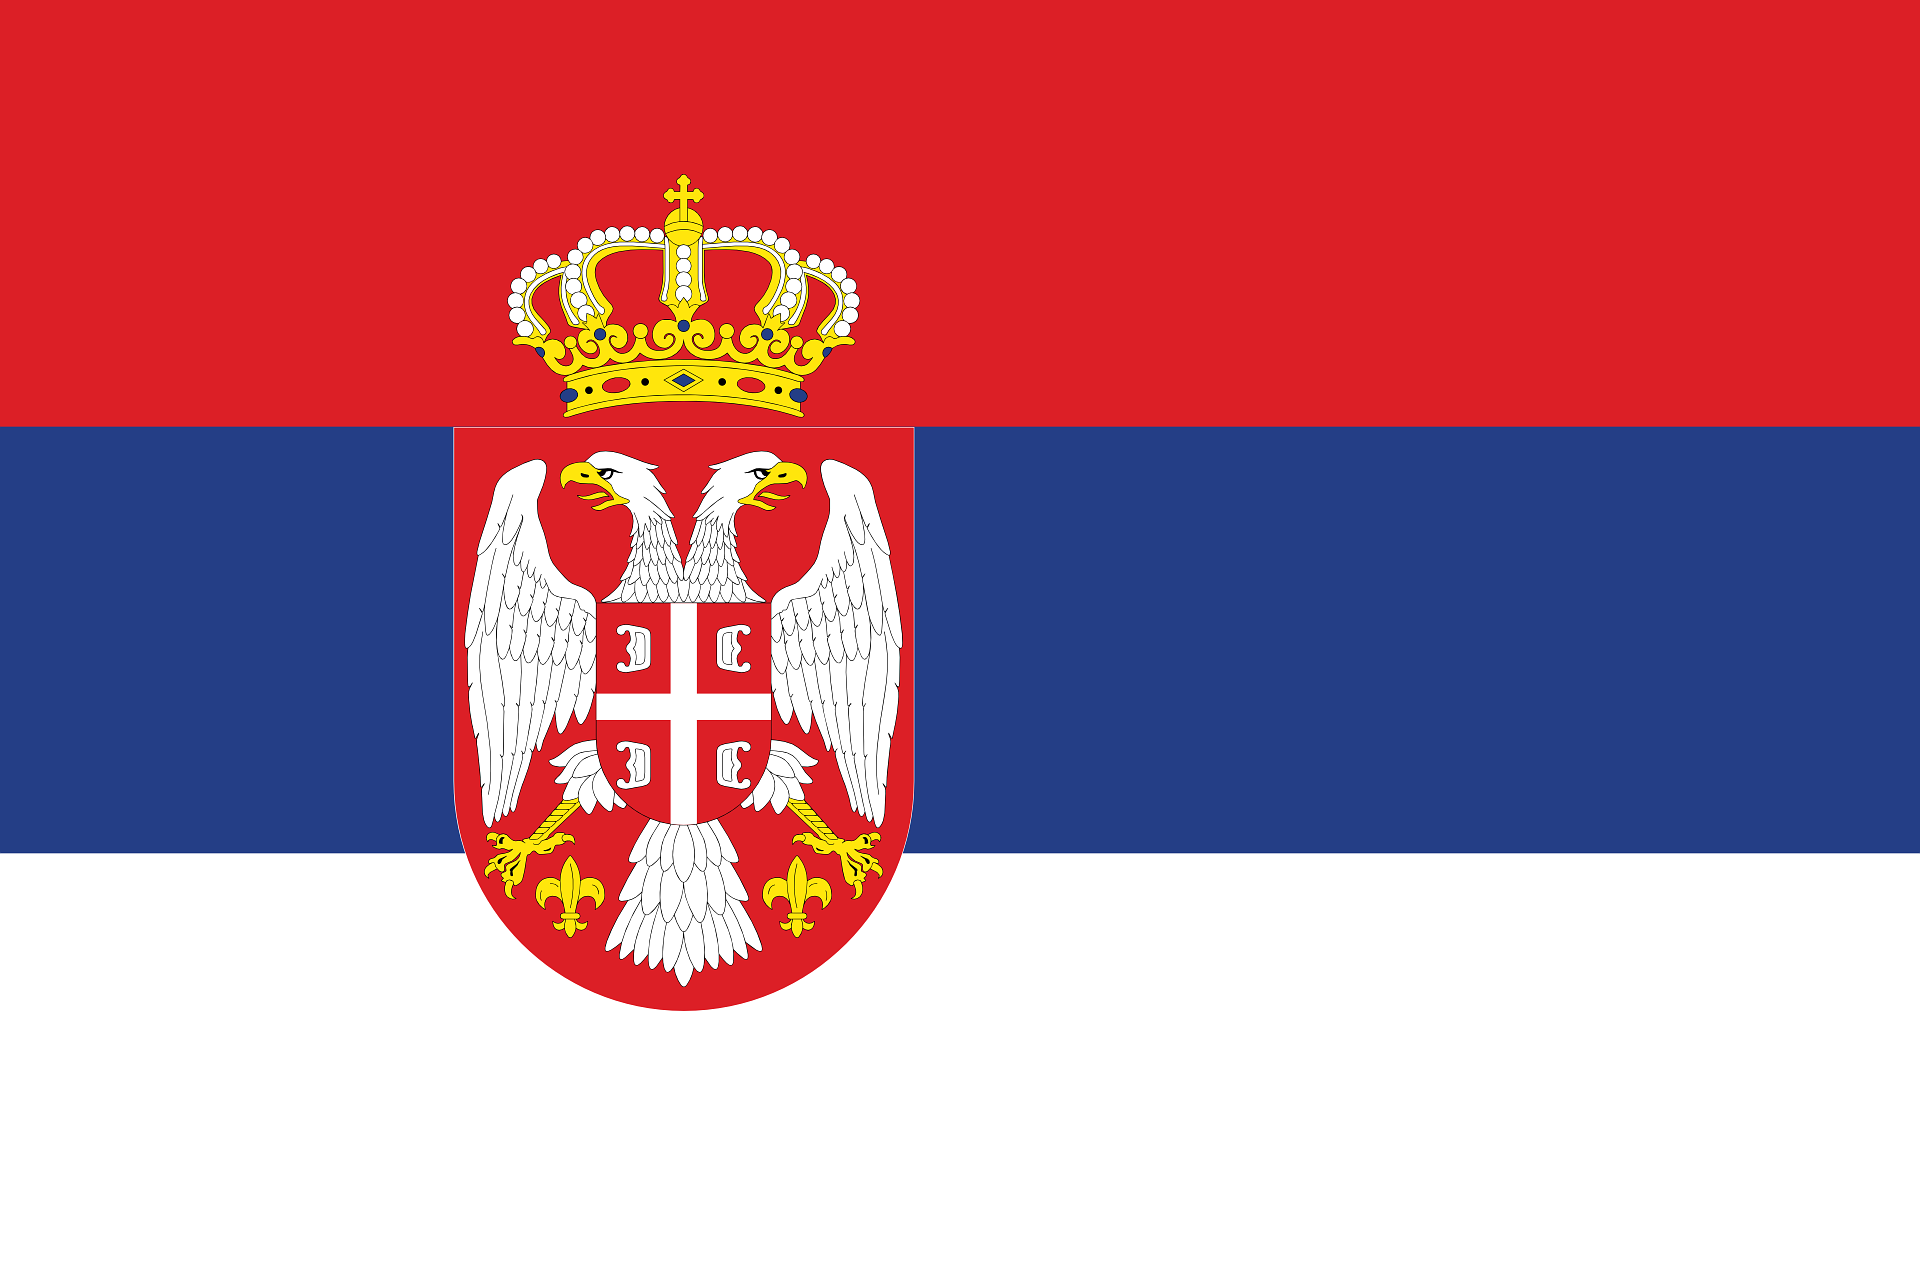 Czech Albanian Camber of Commerce - Serbia flag